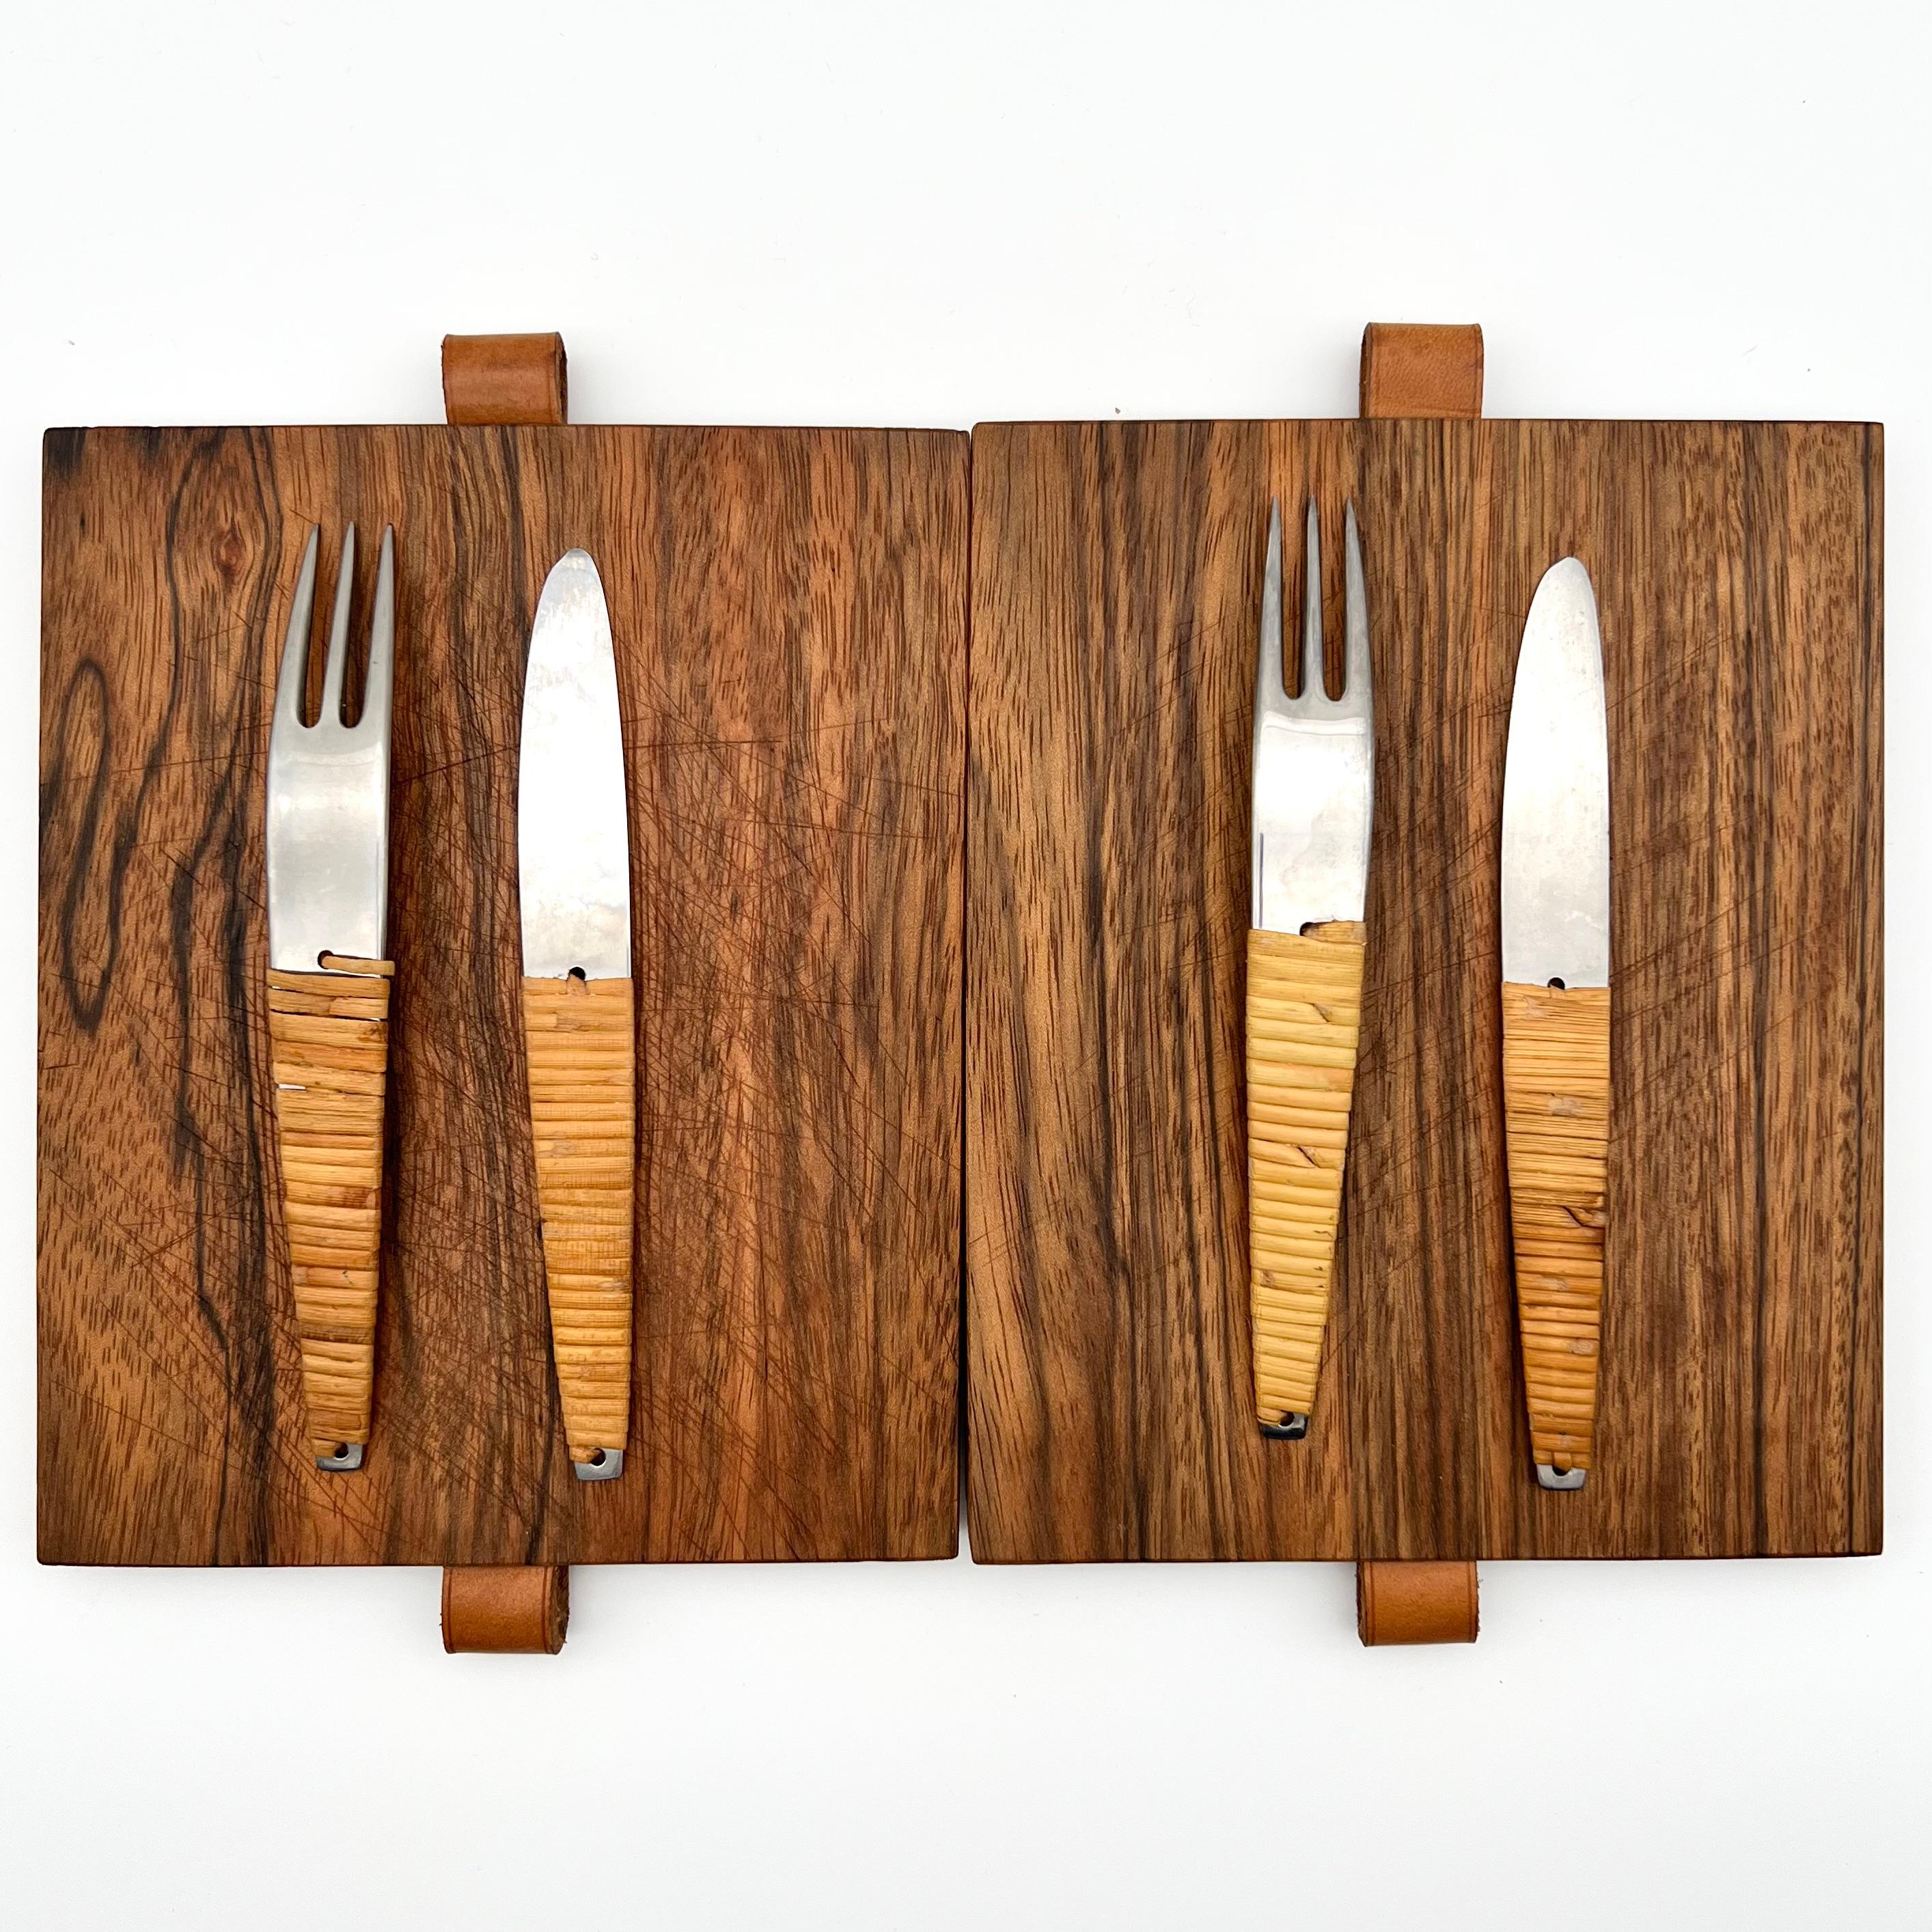 Carl Auböck cutting board & knife and fork set. 
2 sets available 

Original detailing and finishes, walnut cutting board, stainless steel flatware, rattan wrapped handles, leather strap.

Stamped signature to blade: “Auböck stainless made in